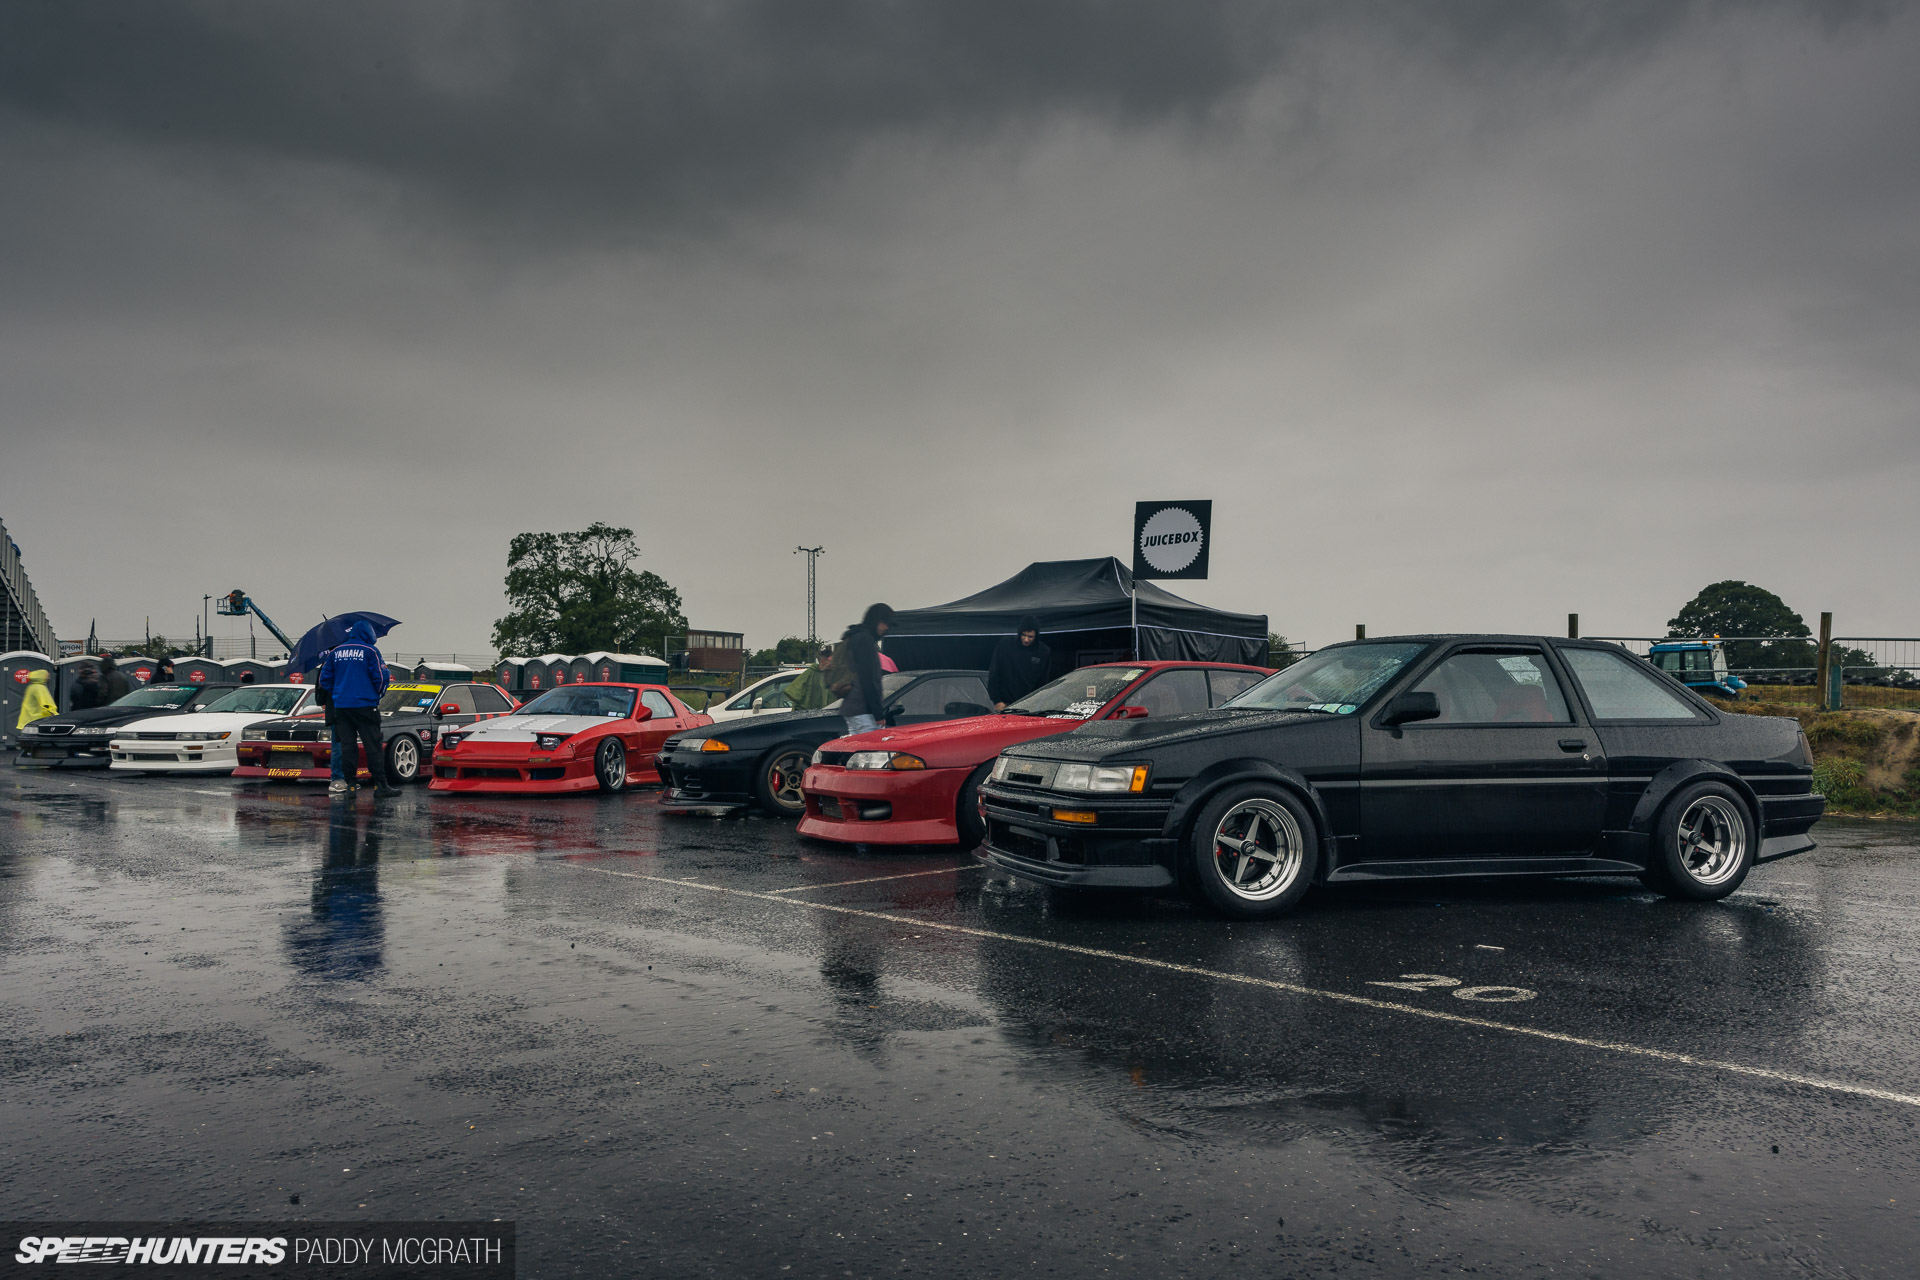 Getting Back Into Speedhunting At LZ Fest